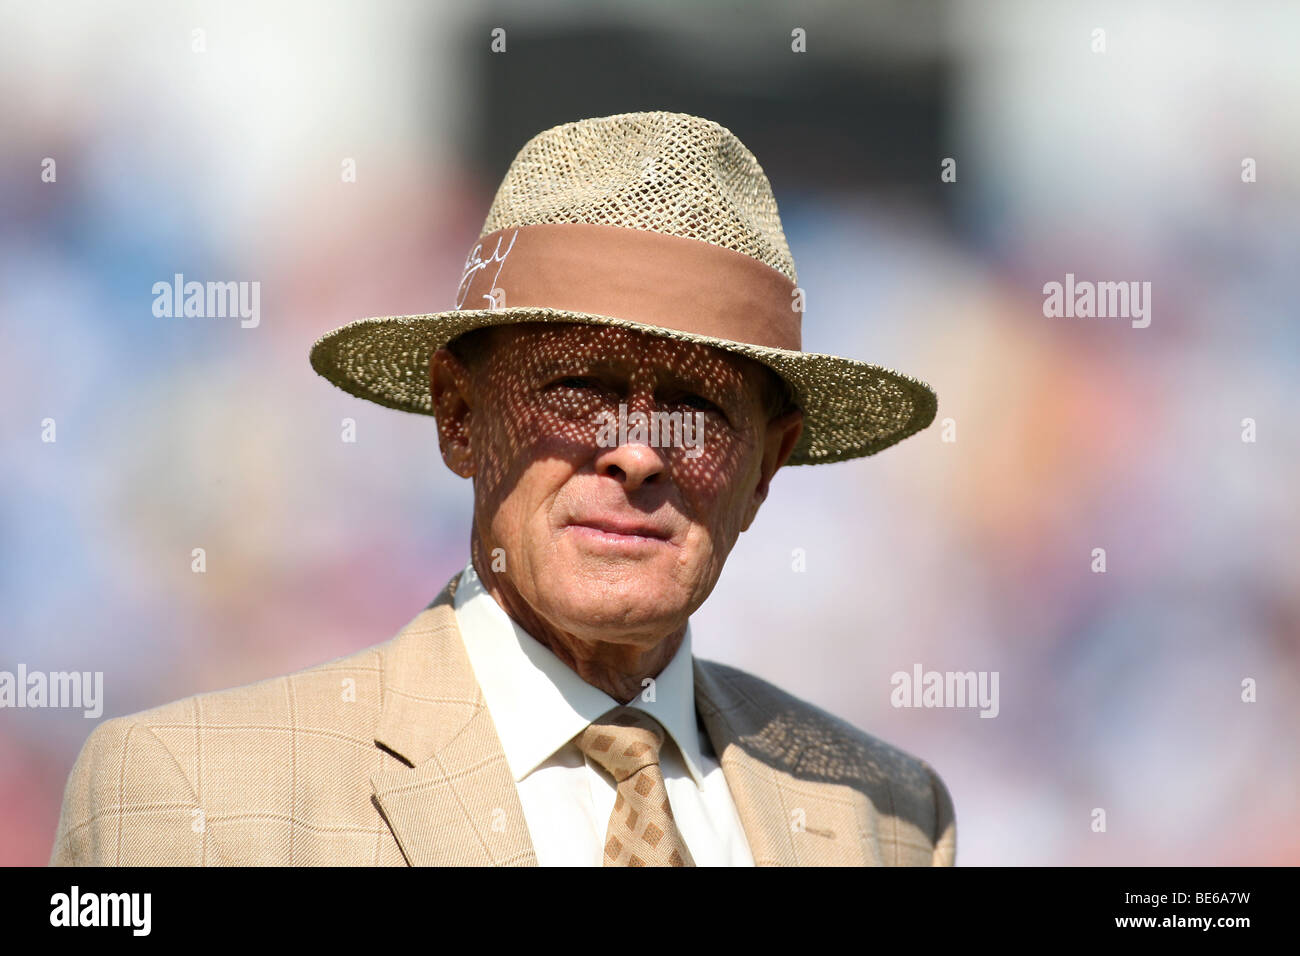 GEOFFREY BOYCOTT 4TH ASHES TEST MATCH ANGLETERRE LEEDS HEADINGLEY 09 Août 2009 Banque D'Images